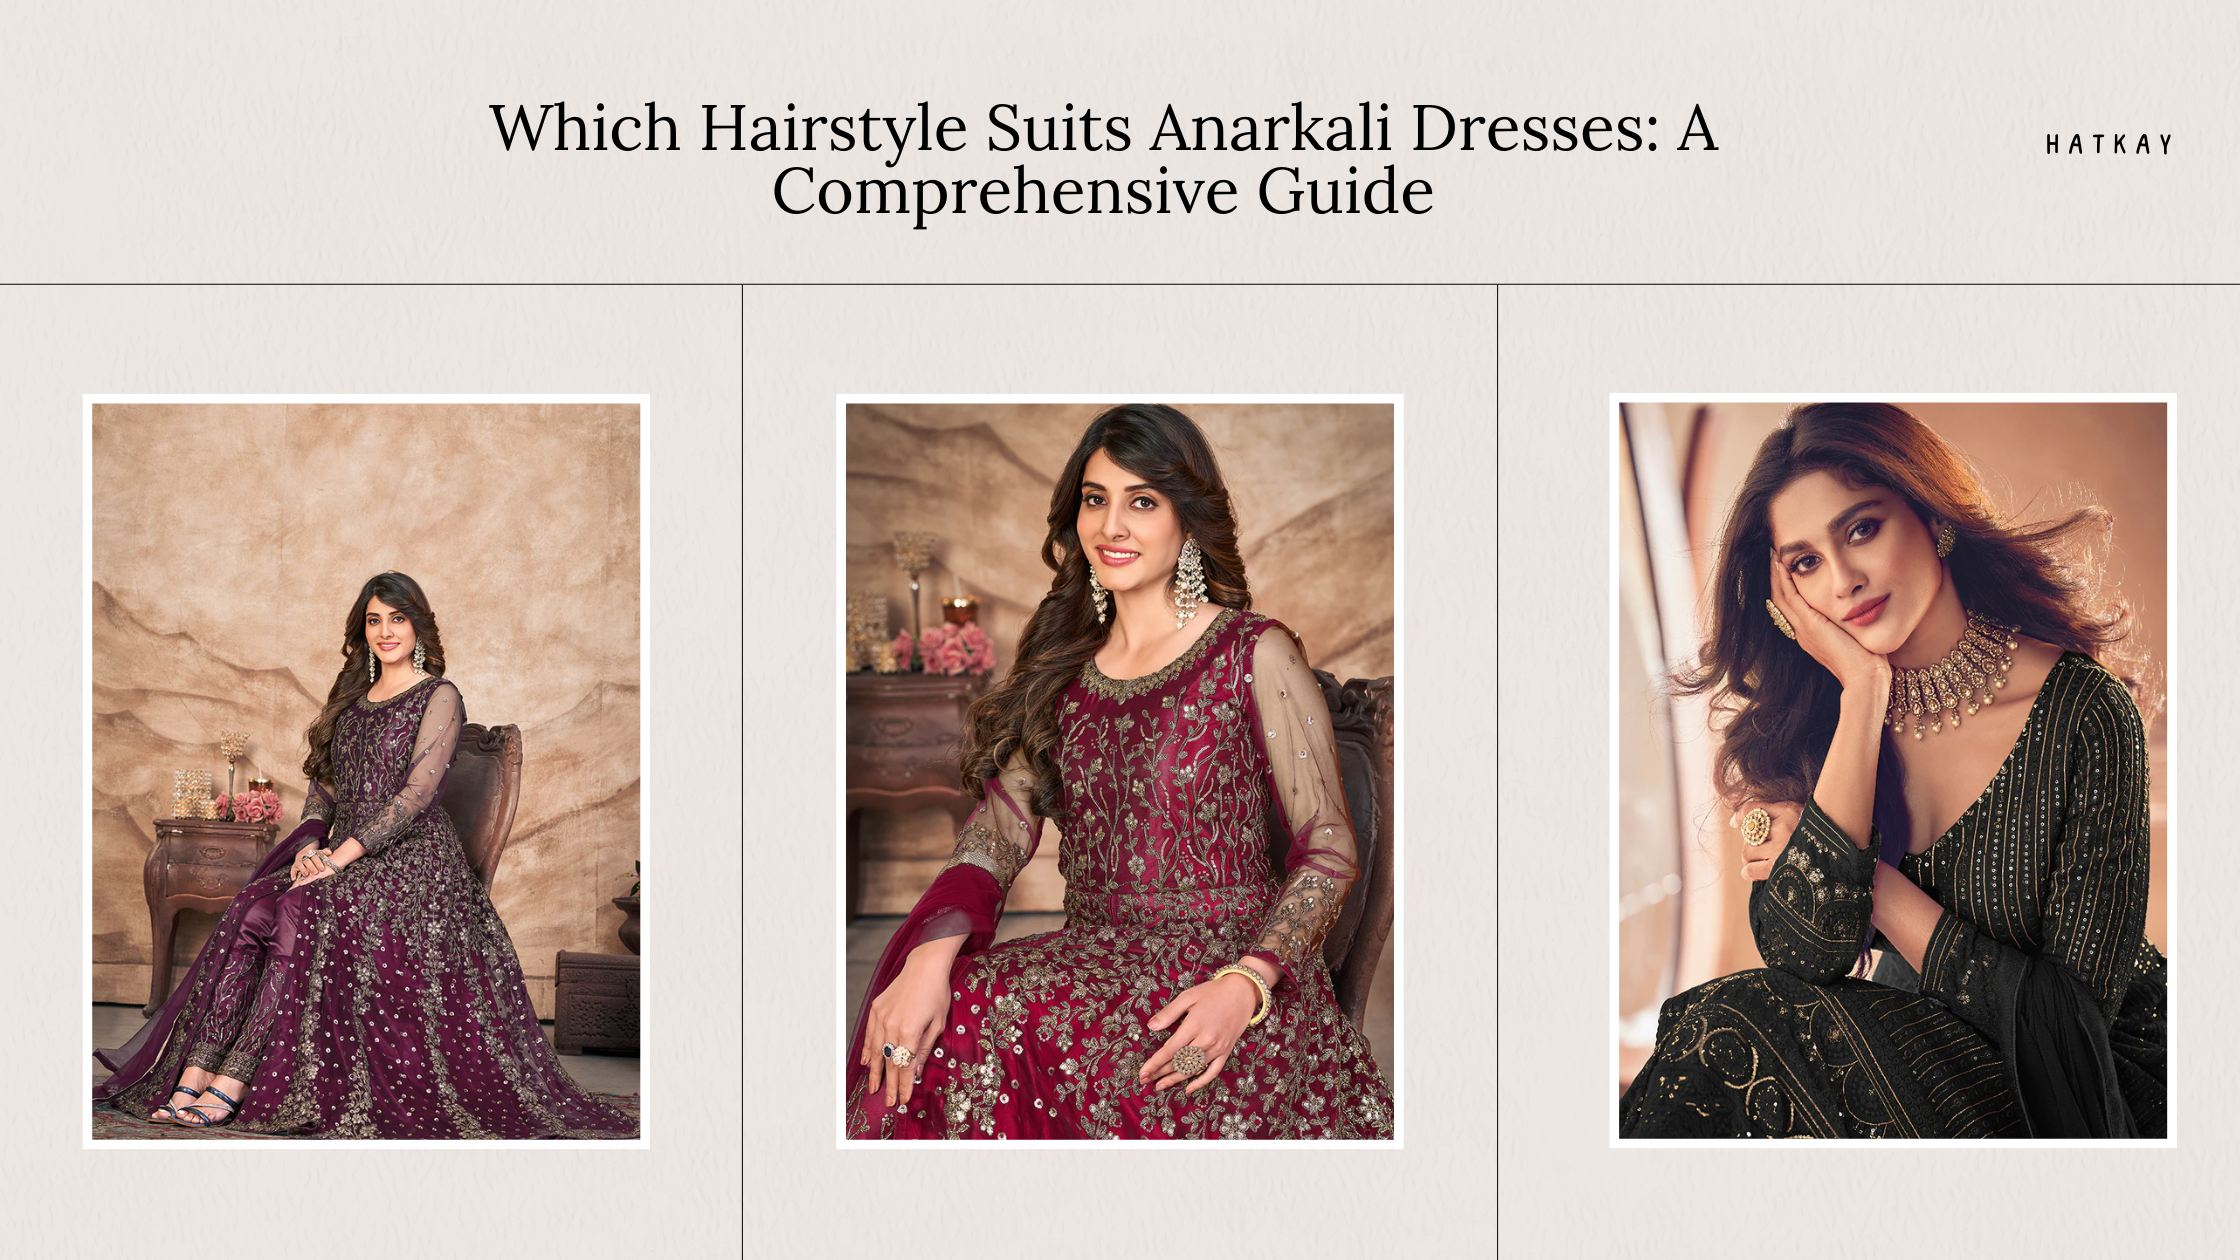 40 Hairstyles for evening gowns